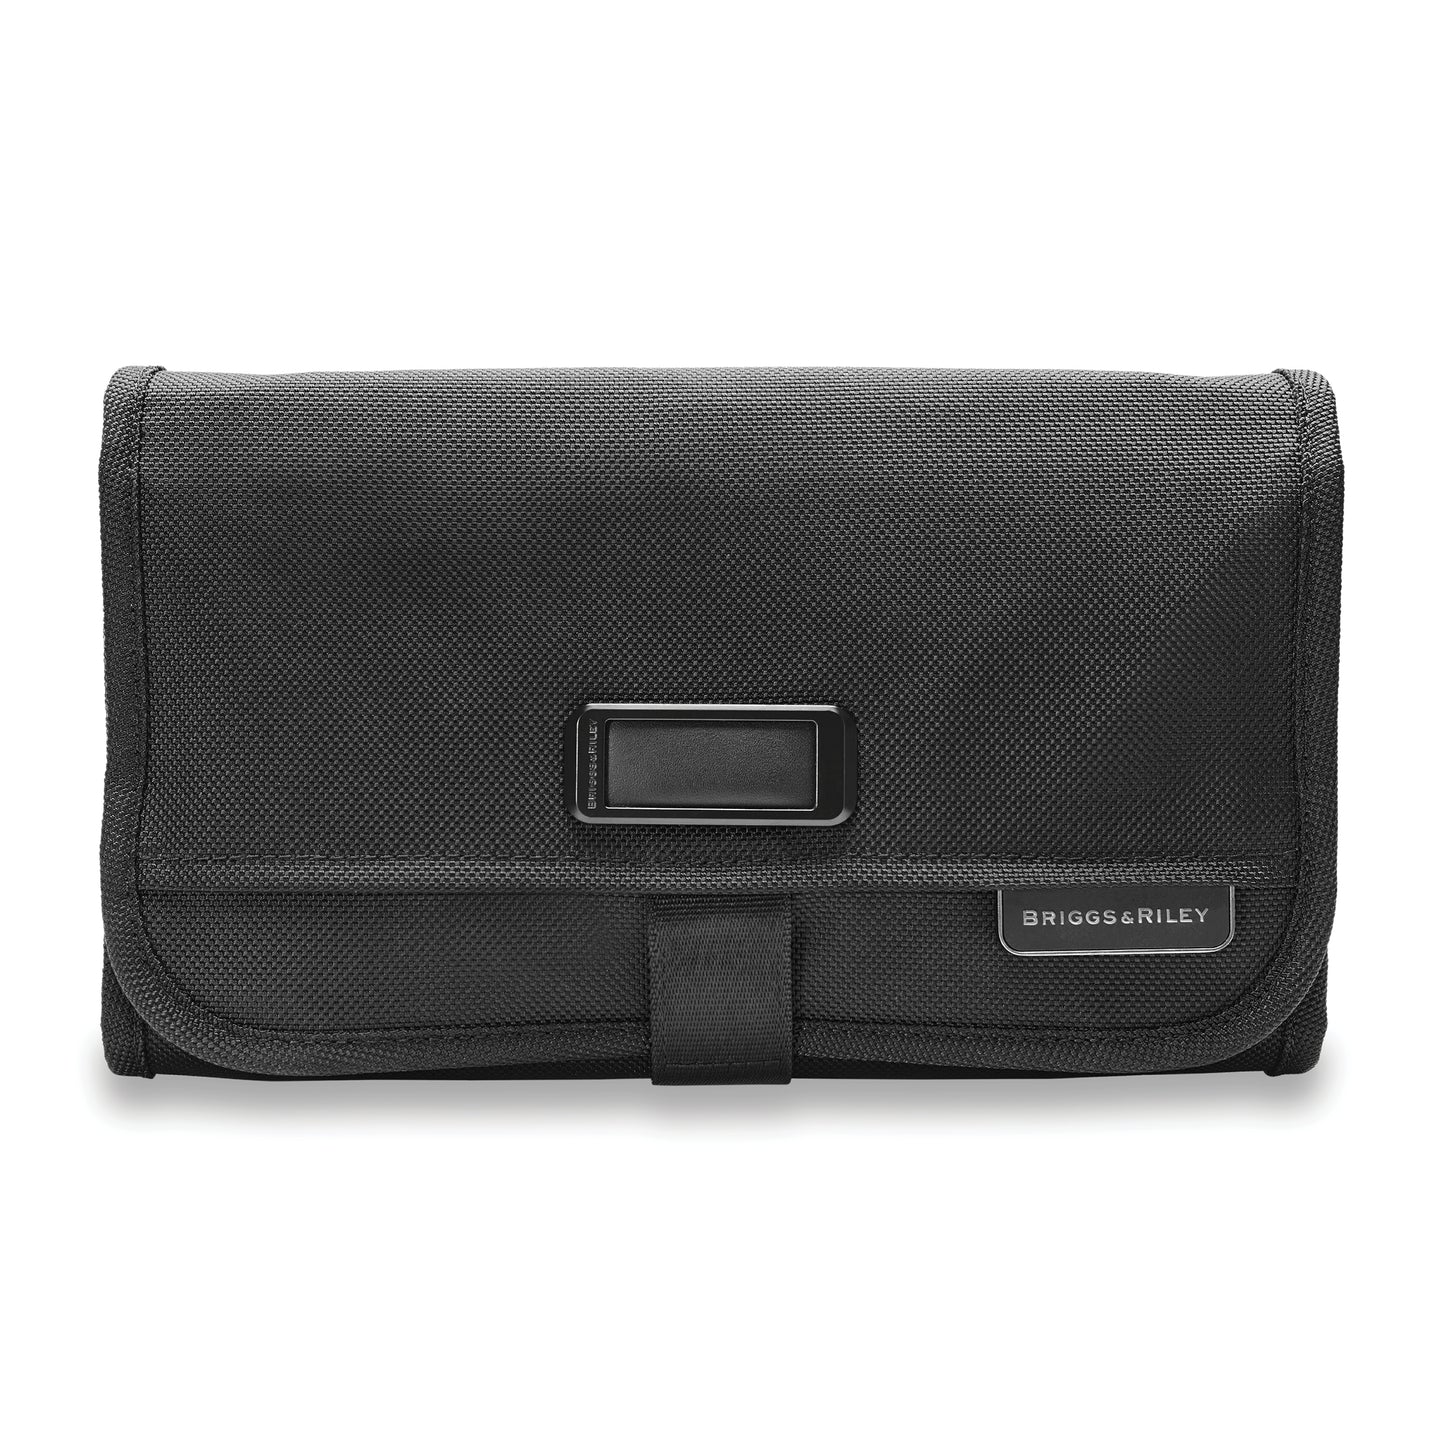 Briggs & Riley Baseline Collection Slim Hanging Toiletry Kit